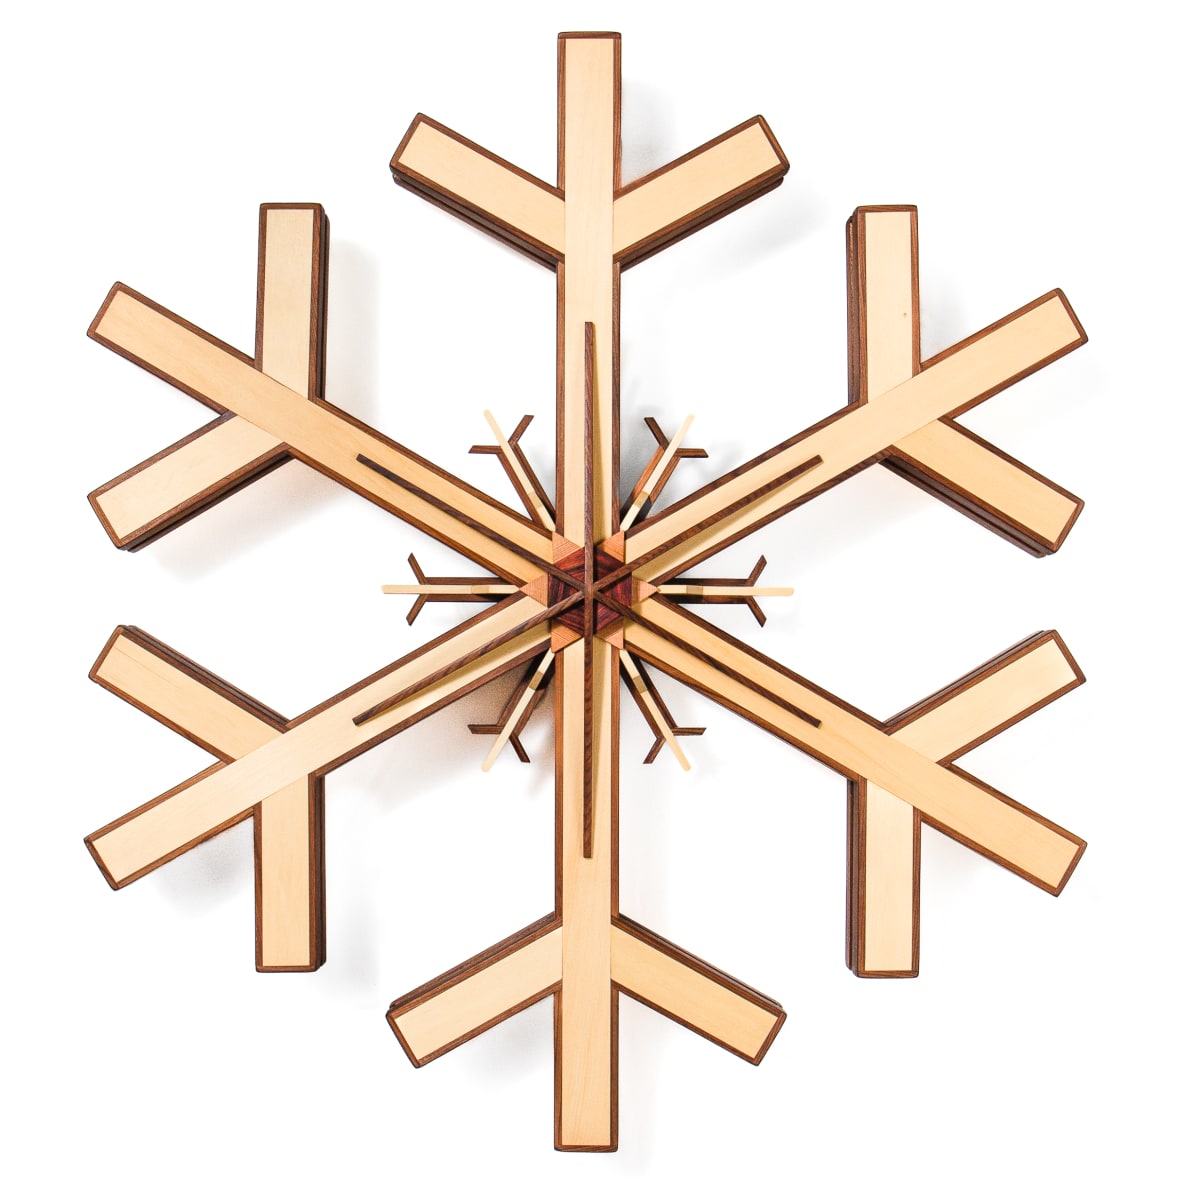 Gemini by Robert E LeBlanc  Image: Double sided snowflake that can be suspended and rotated to show the  intricate joinery.